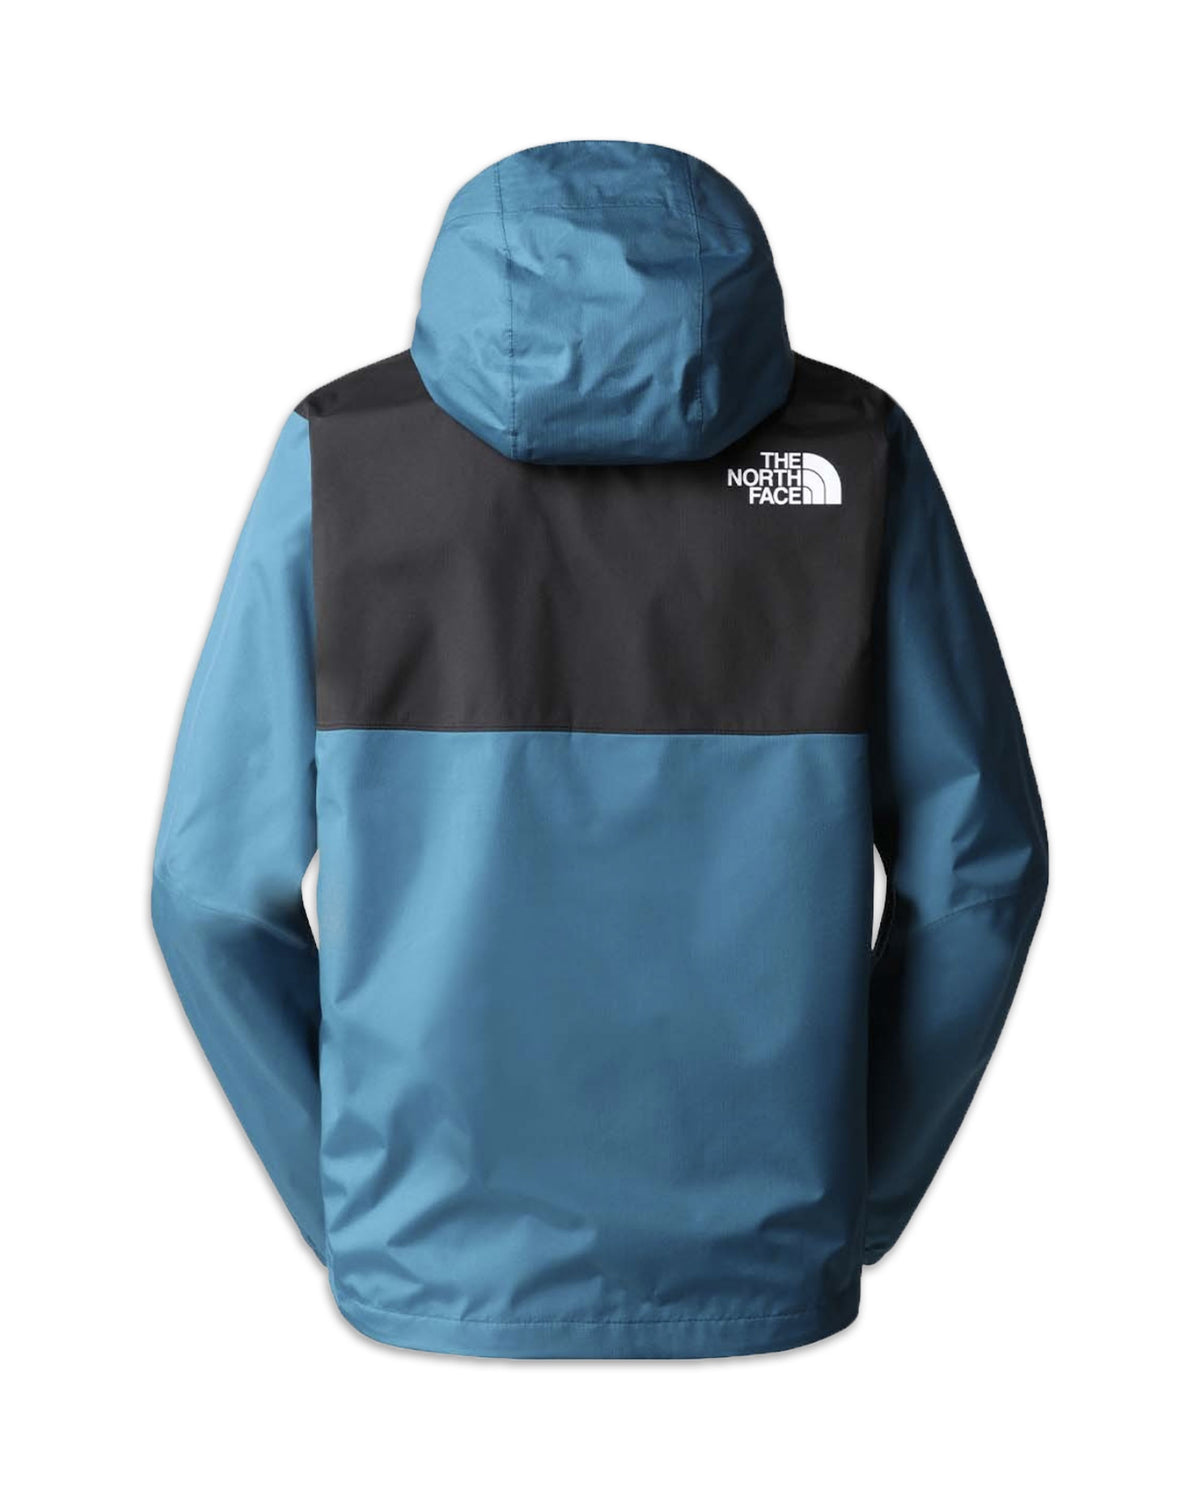 Giacca Uomo The North Face Mountain Q Jacket Blue Coral